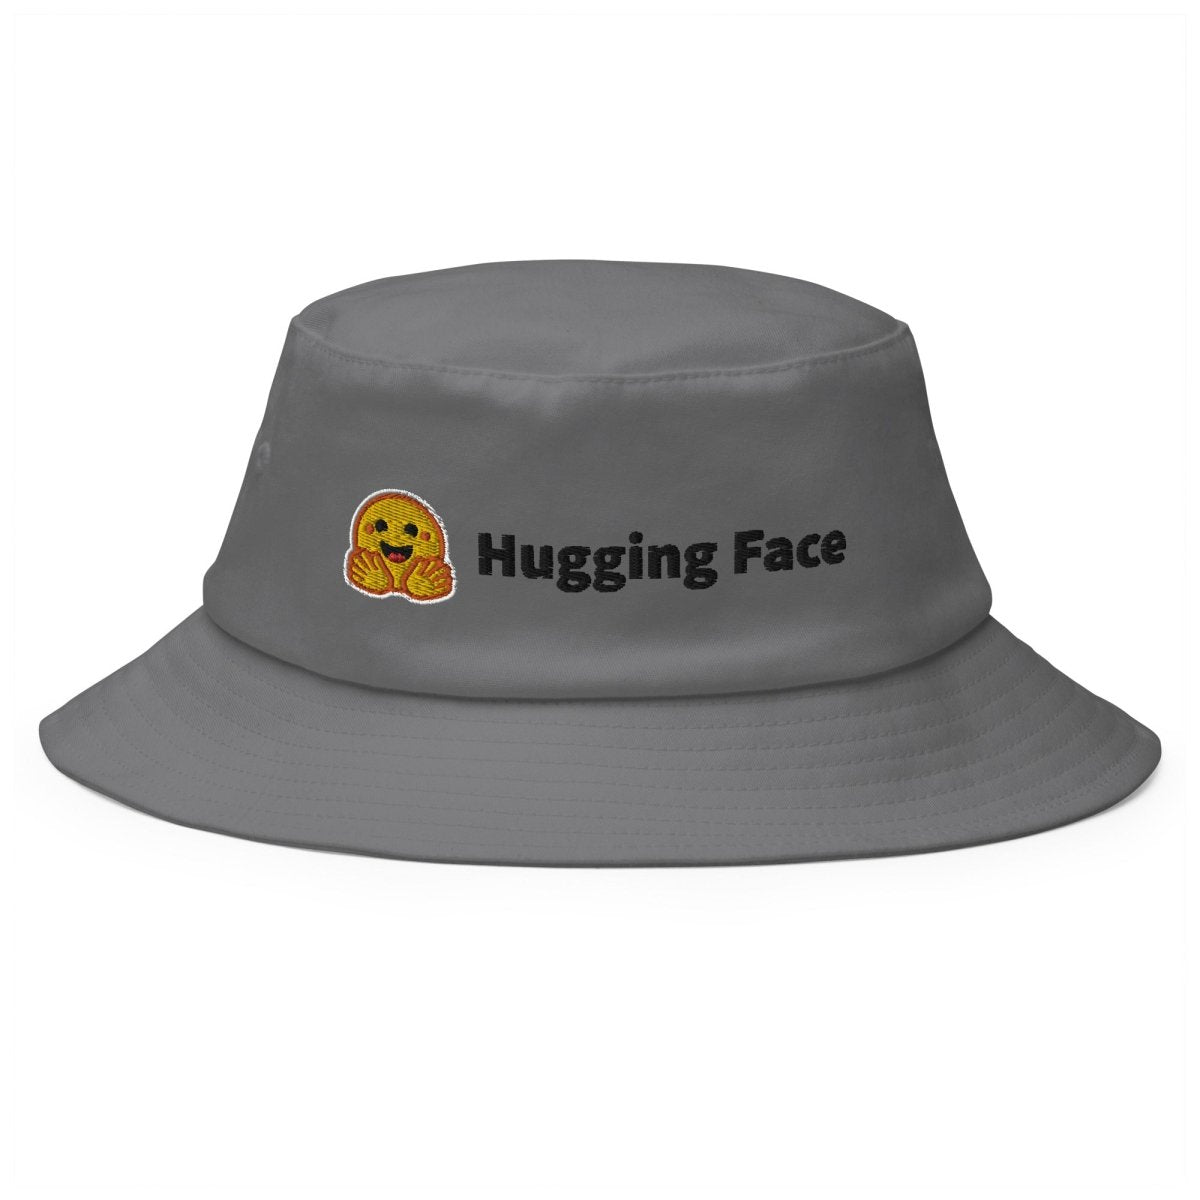 Hugging Face Black Logo Embroidered Bucket Hat - Grey - AI Store